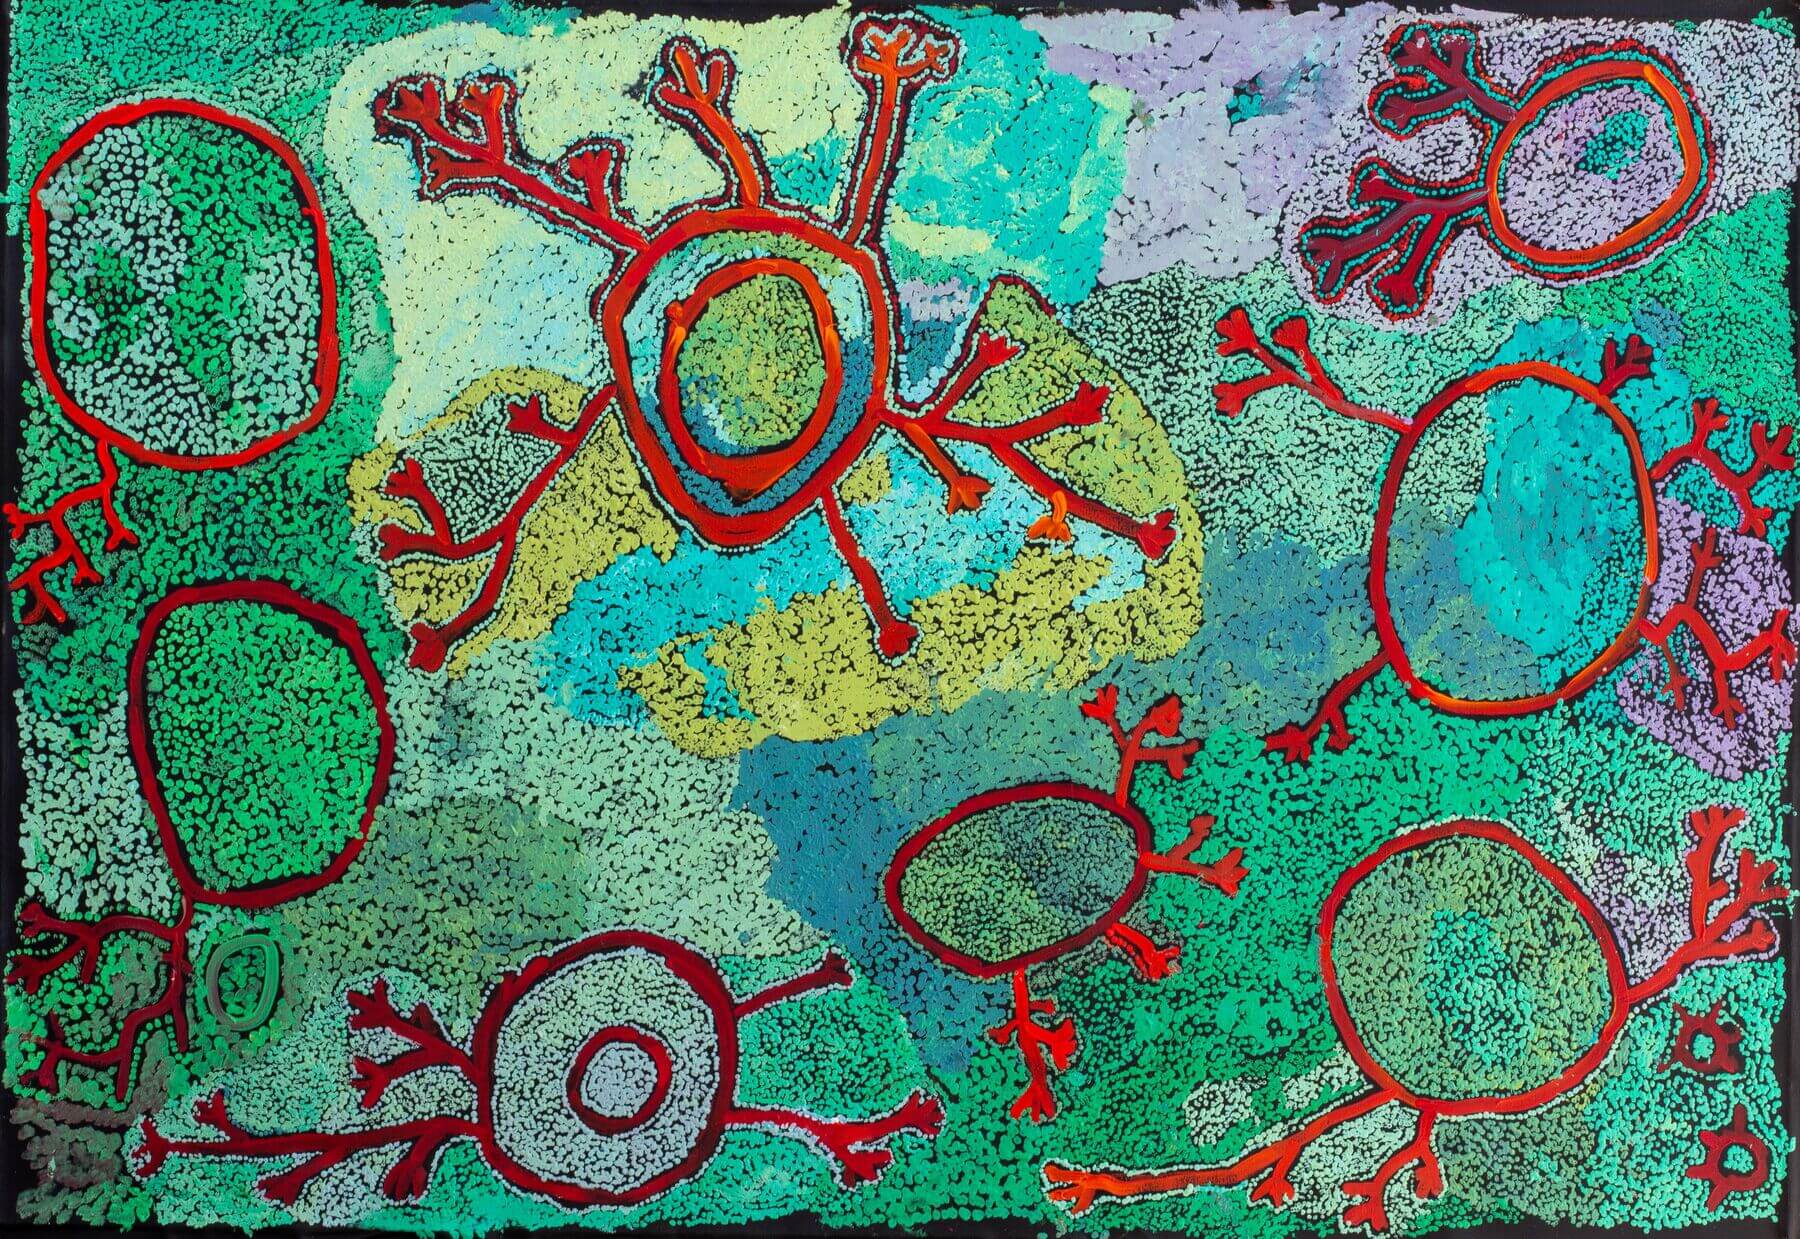 Painting of Spinifex Country by Aboriginal artist Simon Hogan. Green with red shapes indicating places of significance